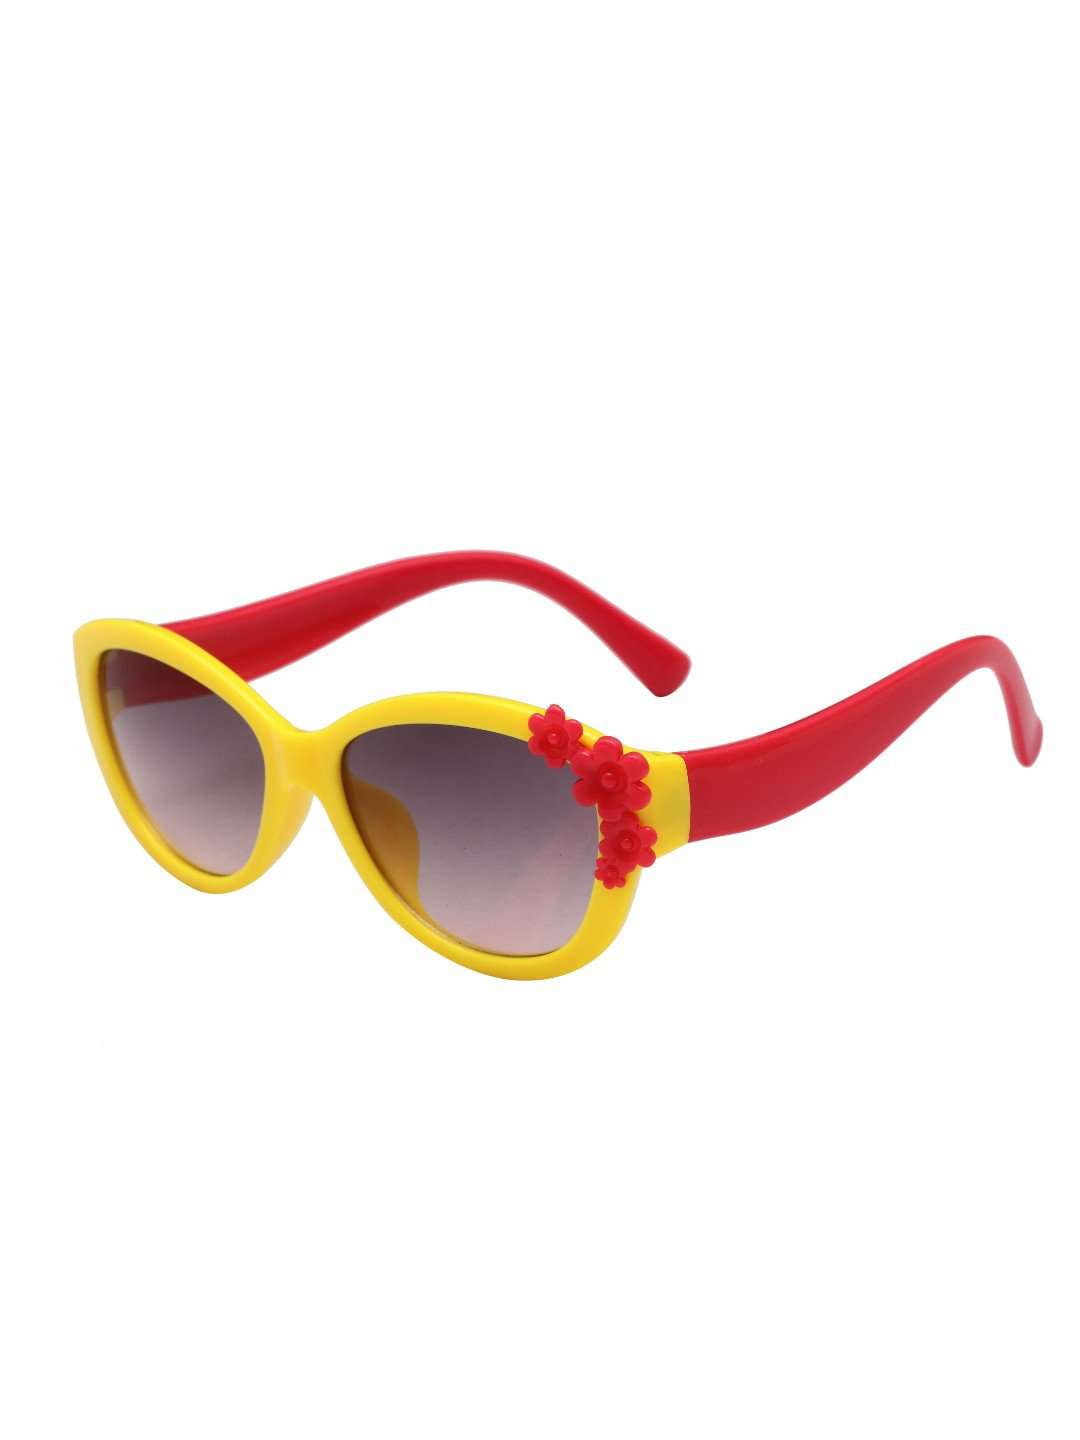 Stol'n Kids Yellow and Red Flower Applique Cat Eye Sunglasses - SWHF